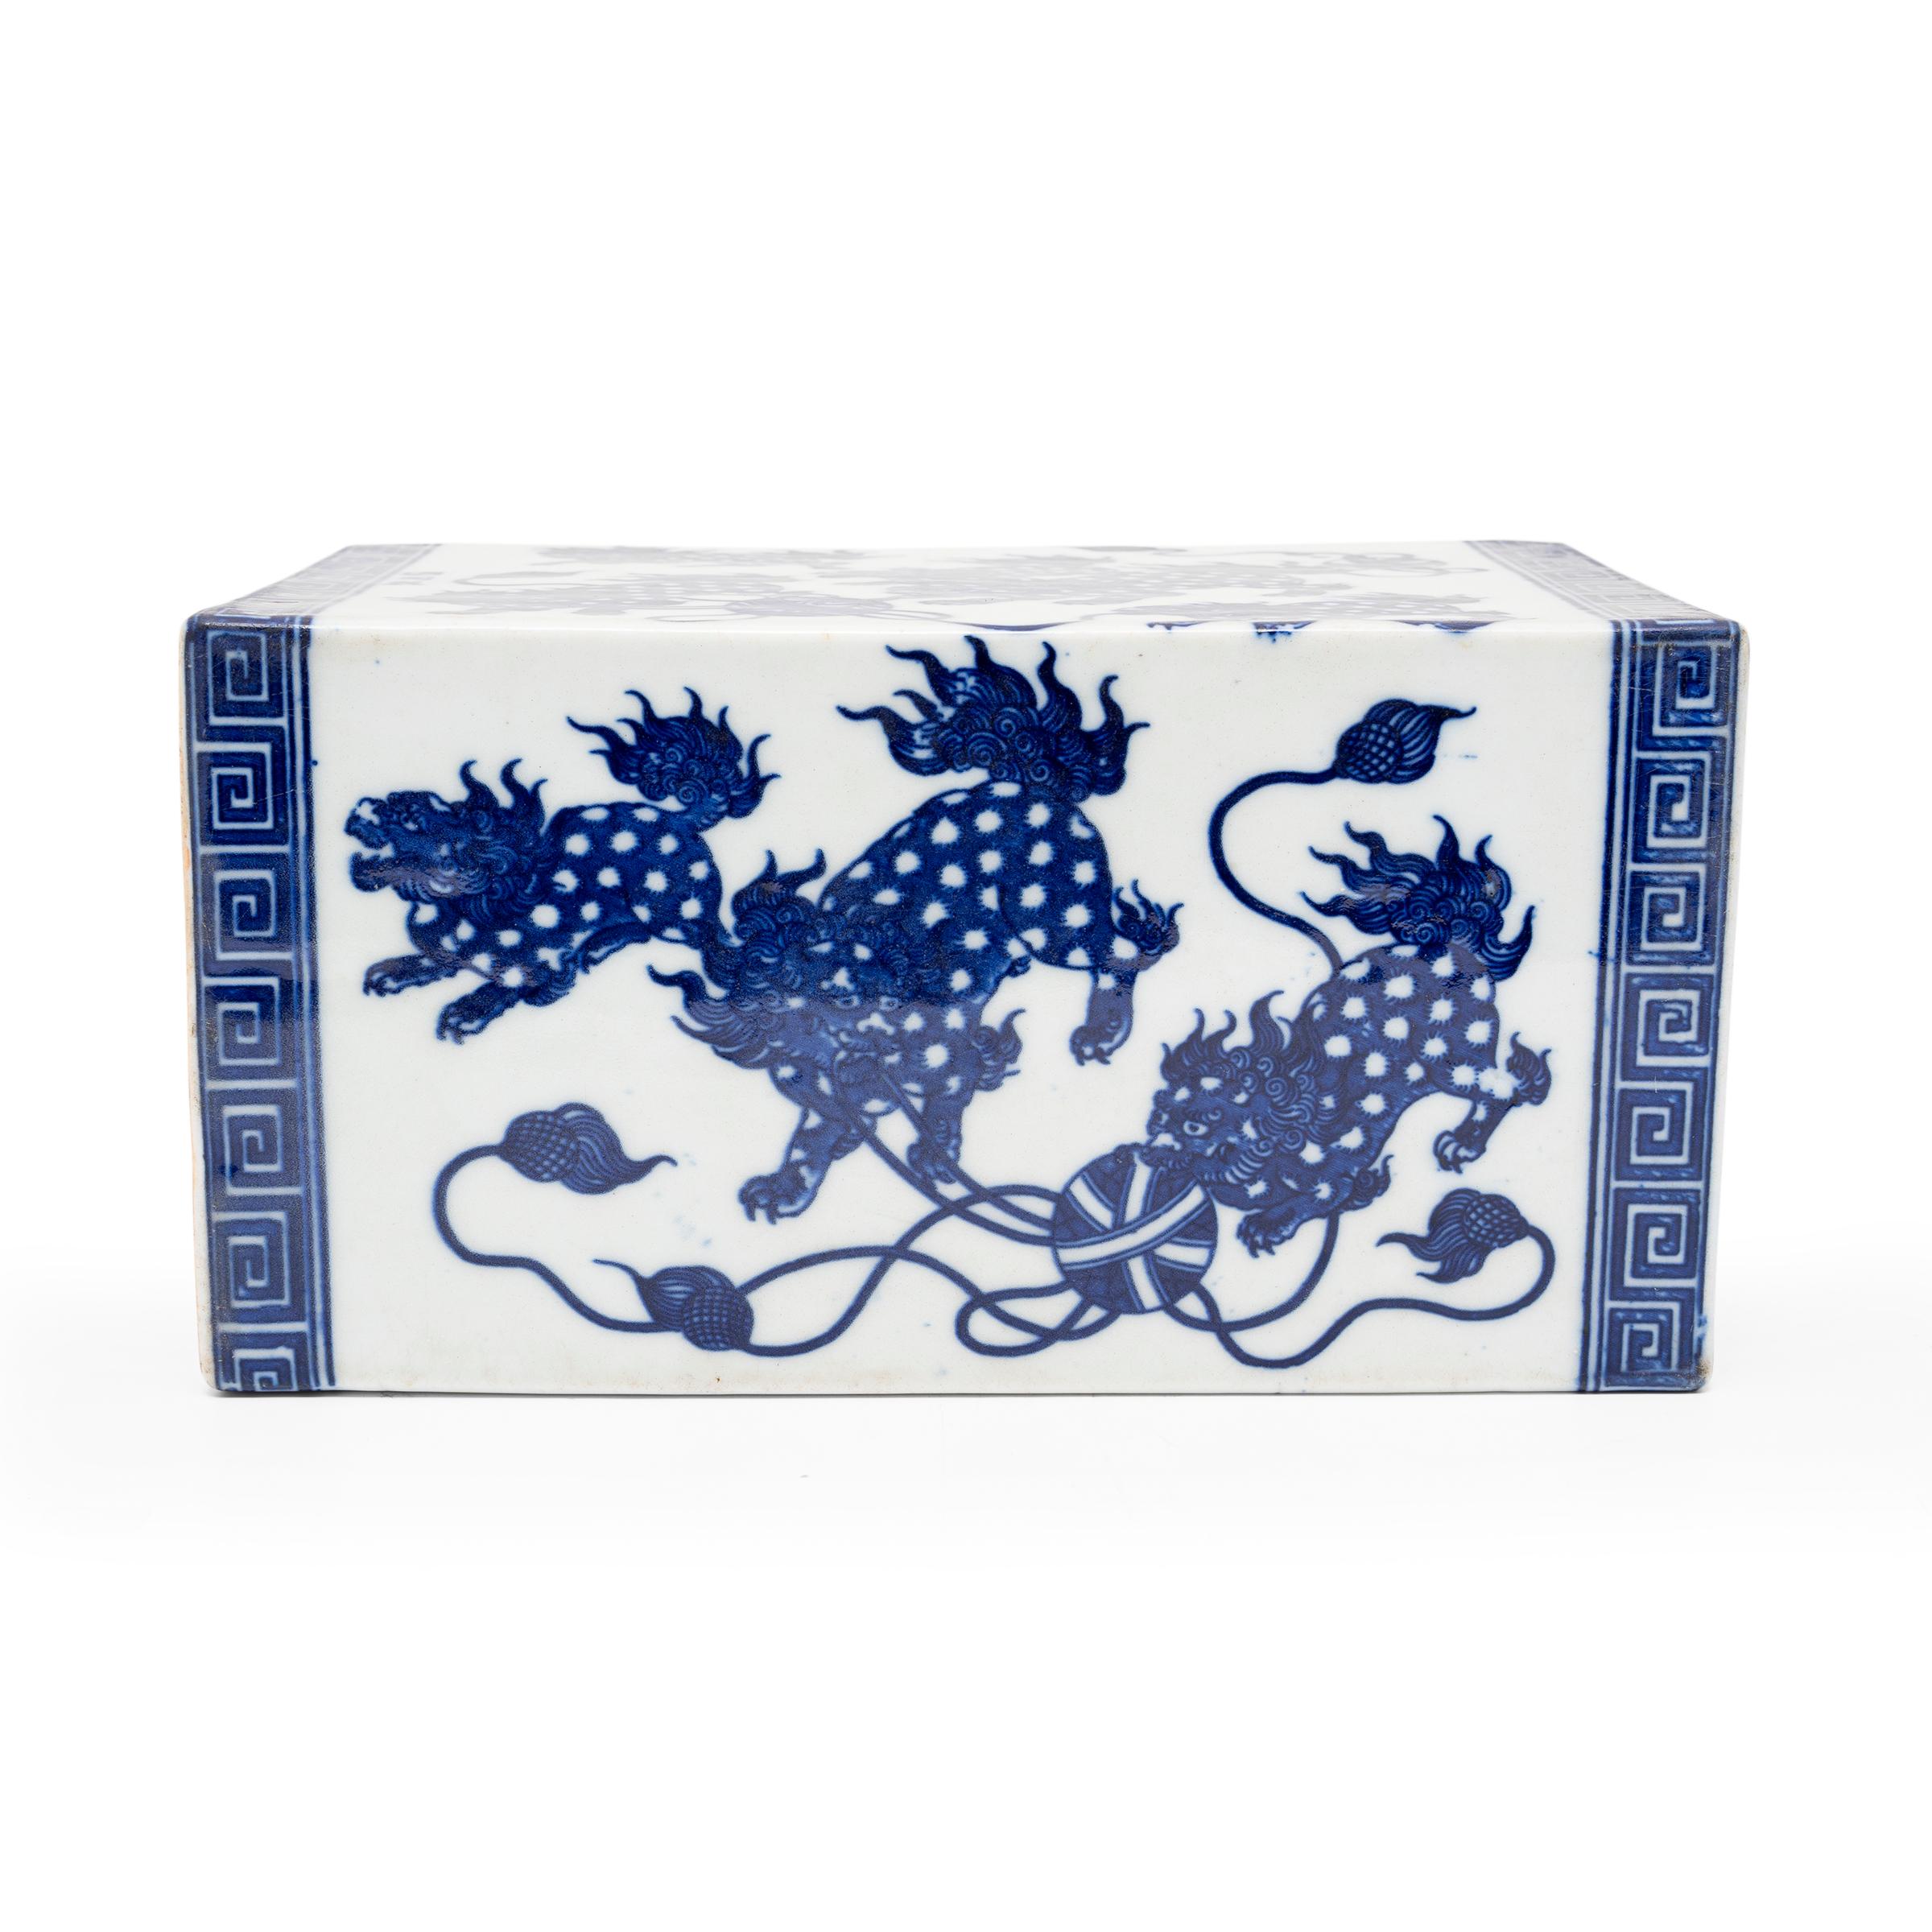 This large ceramic block is actually a form of Chinese headrest or neck pillow. Popular during the Qing dynasty, rigid headrests such as this were used by upper-class women to protect their elaborate hairstyles by elevating the head during slumber.